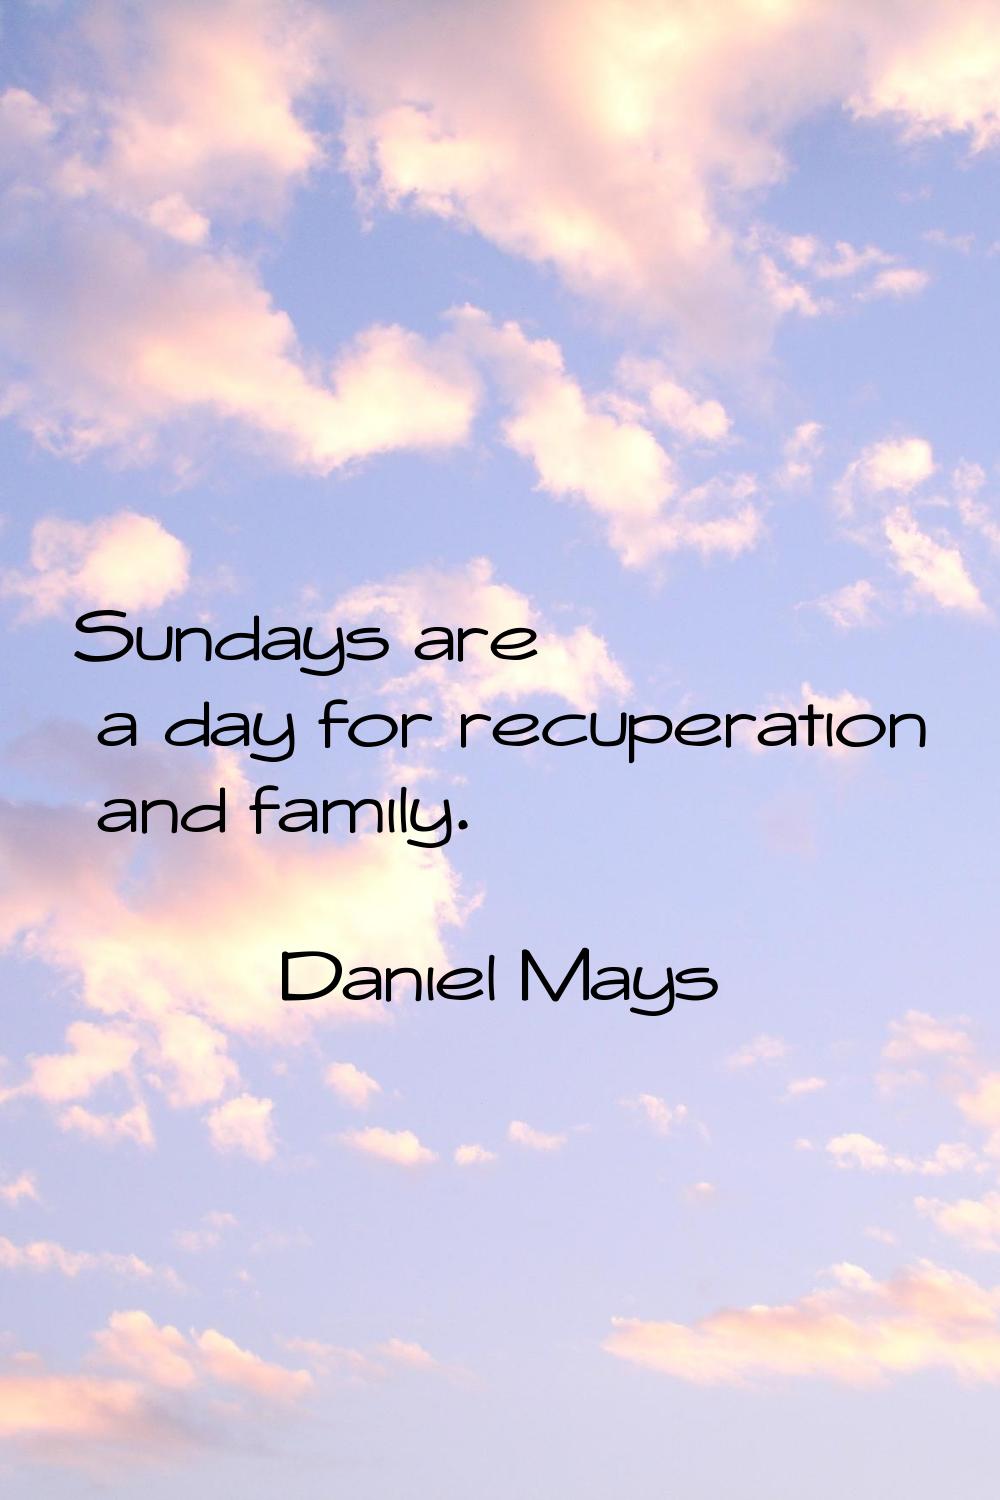 Sundays are a day for recuperation and family.